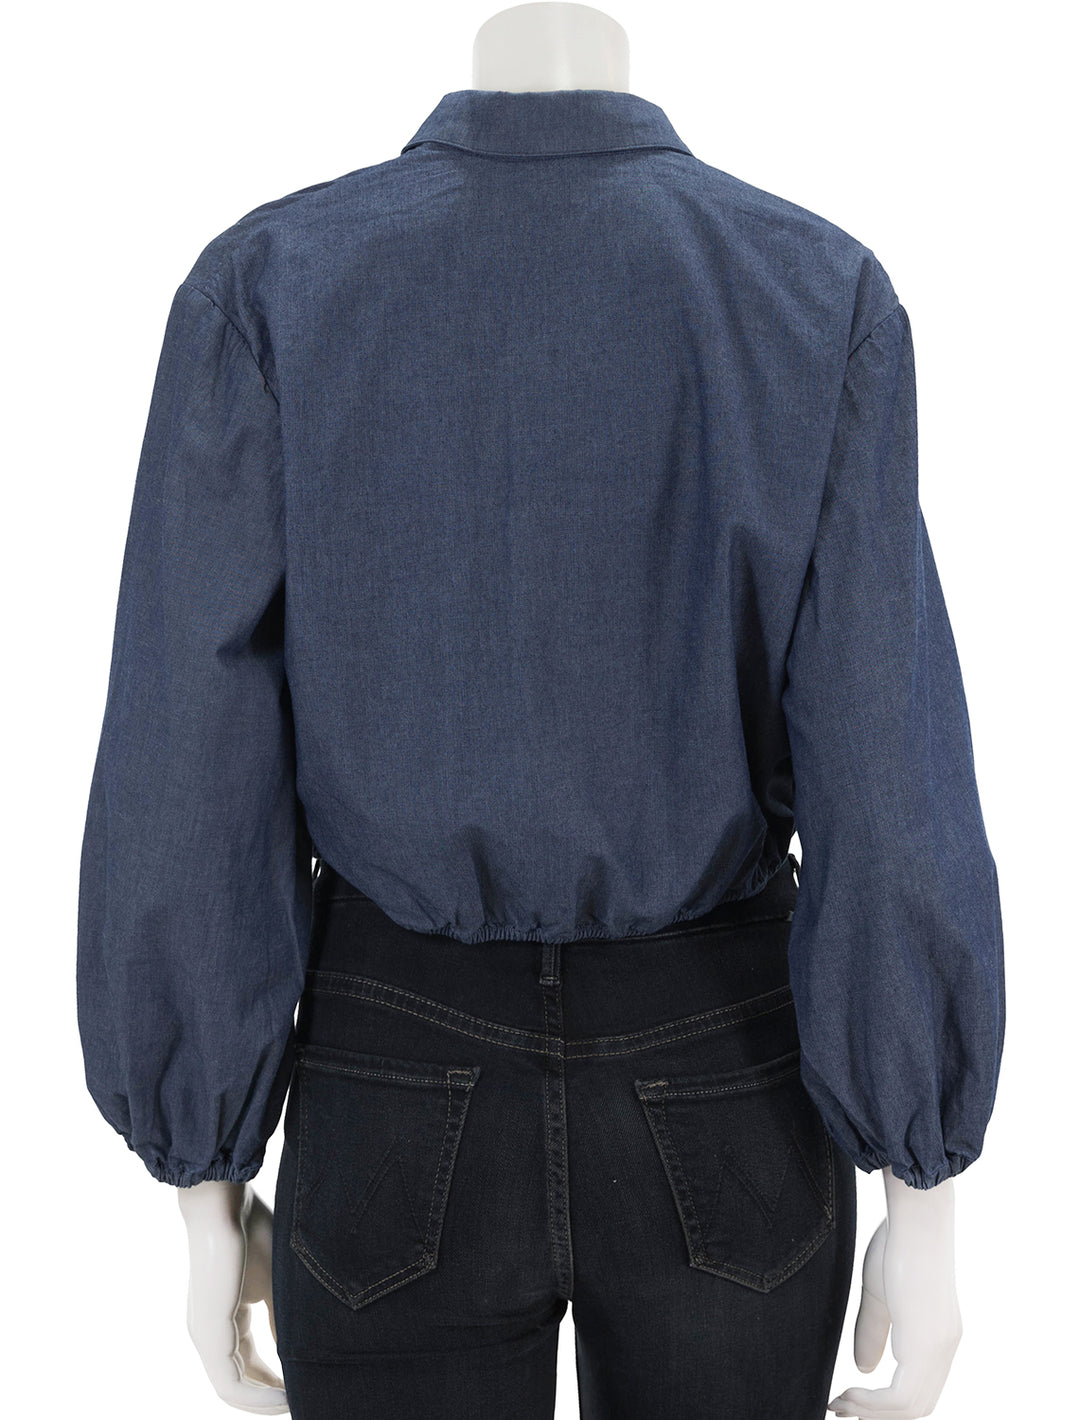 Back view of Cara Cara's rumson top in chambray.